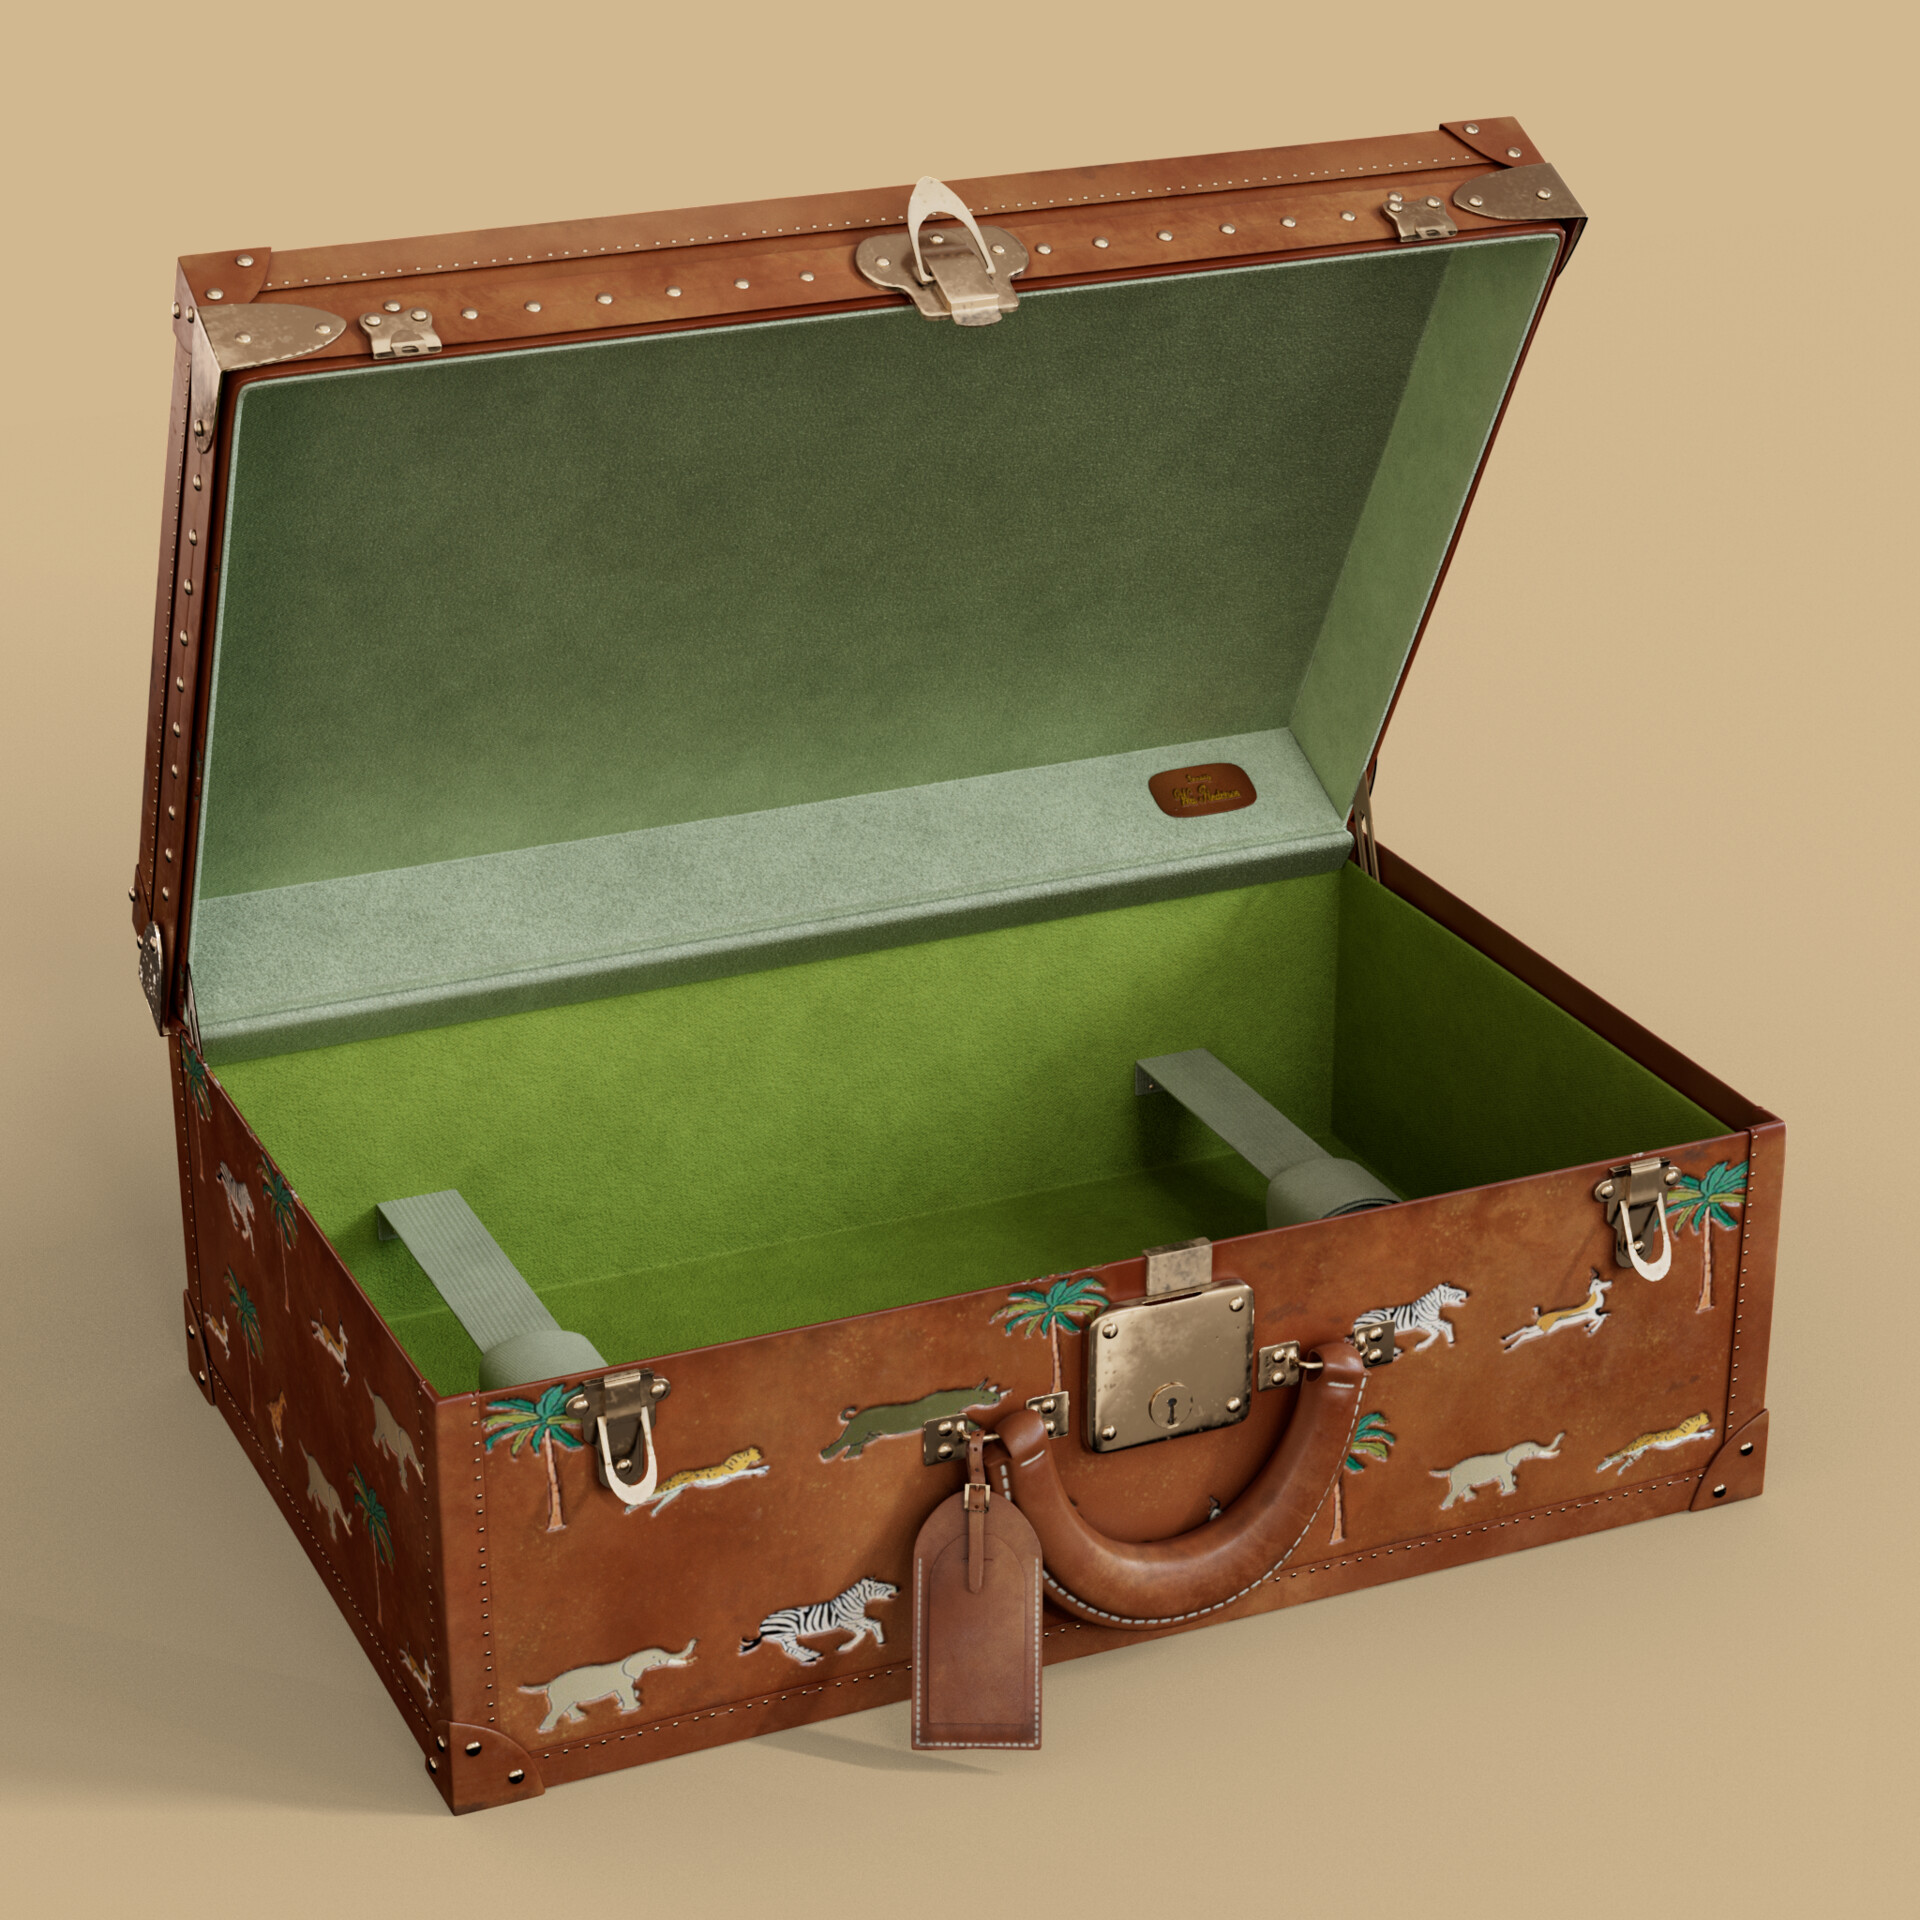 Wes Anderson-Inspired Luggage